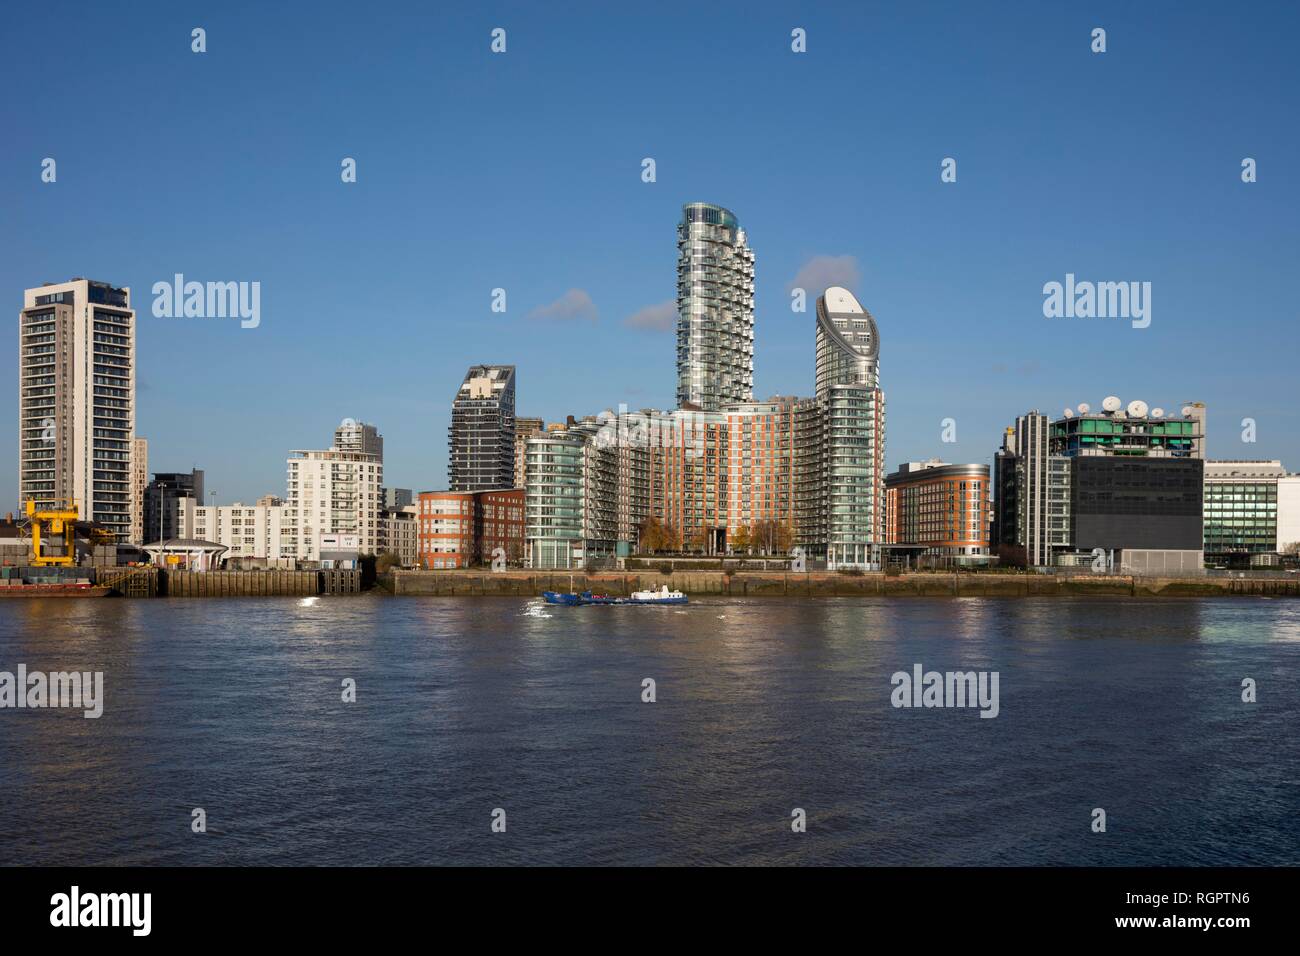 Modern residential and office buildings, Canary Wharf, Isle of Dogs, Docklands, London, England, United Kingdom Stock Photo